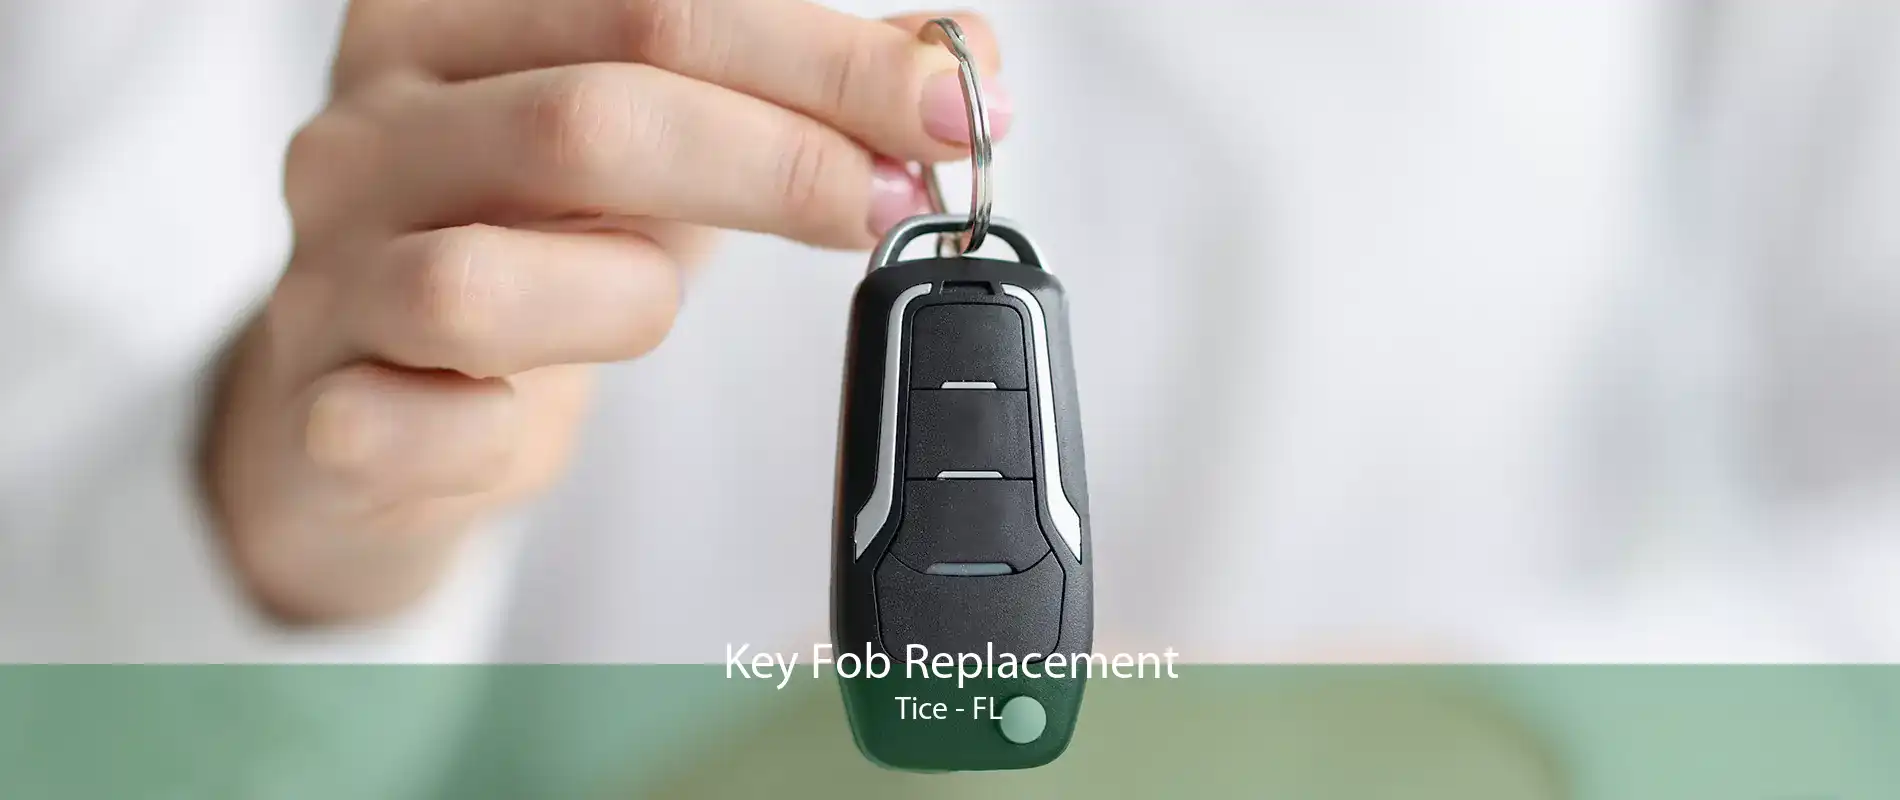 Key Fob Replacement Tice - FL